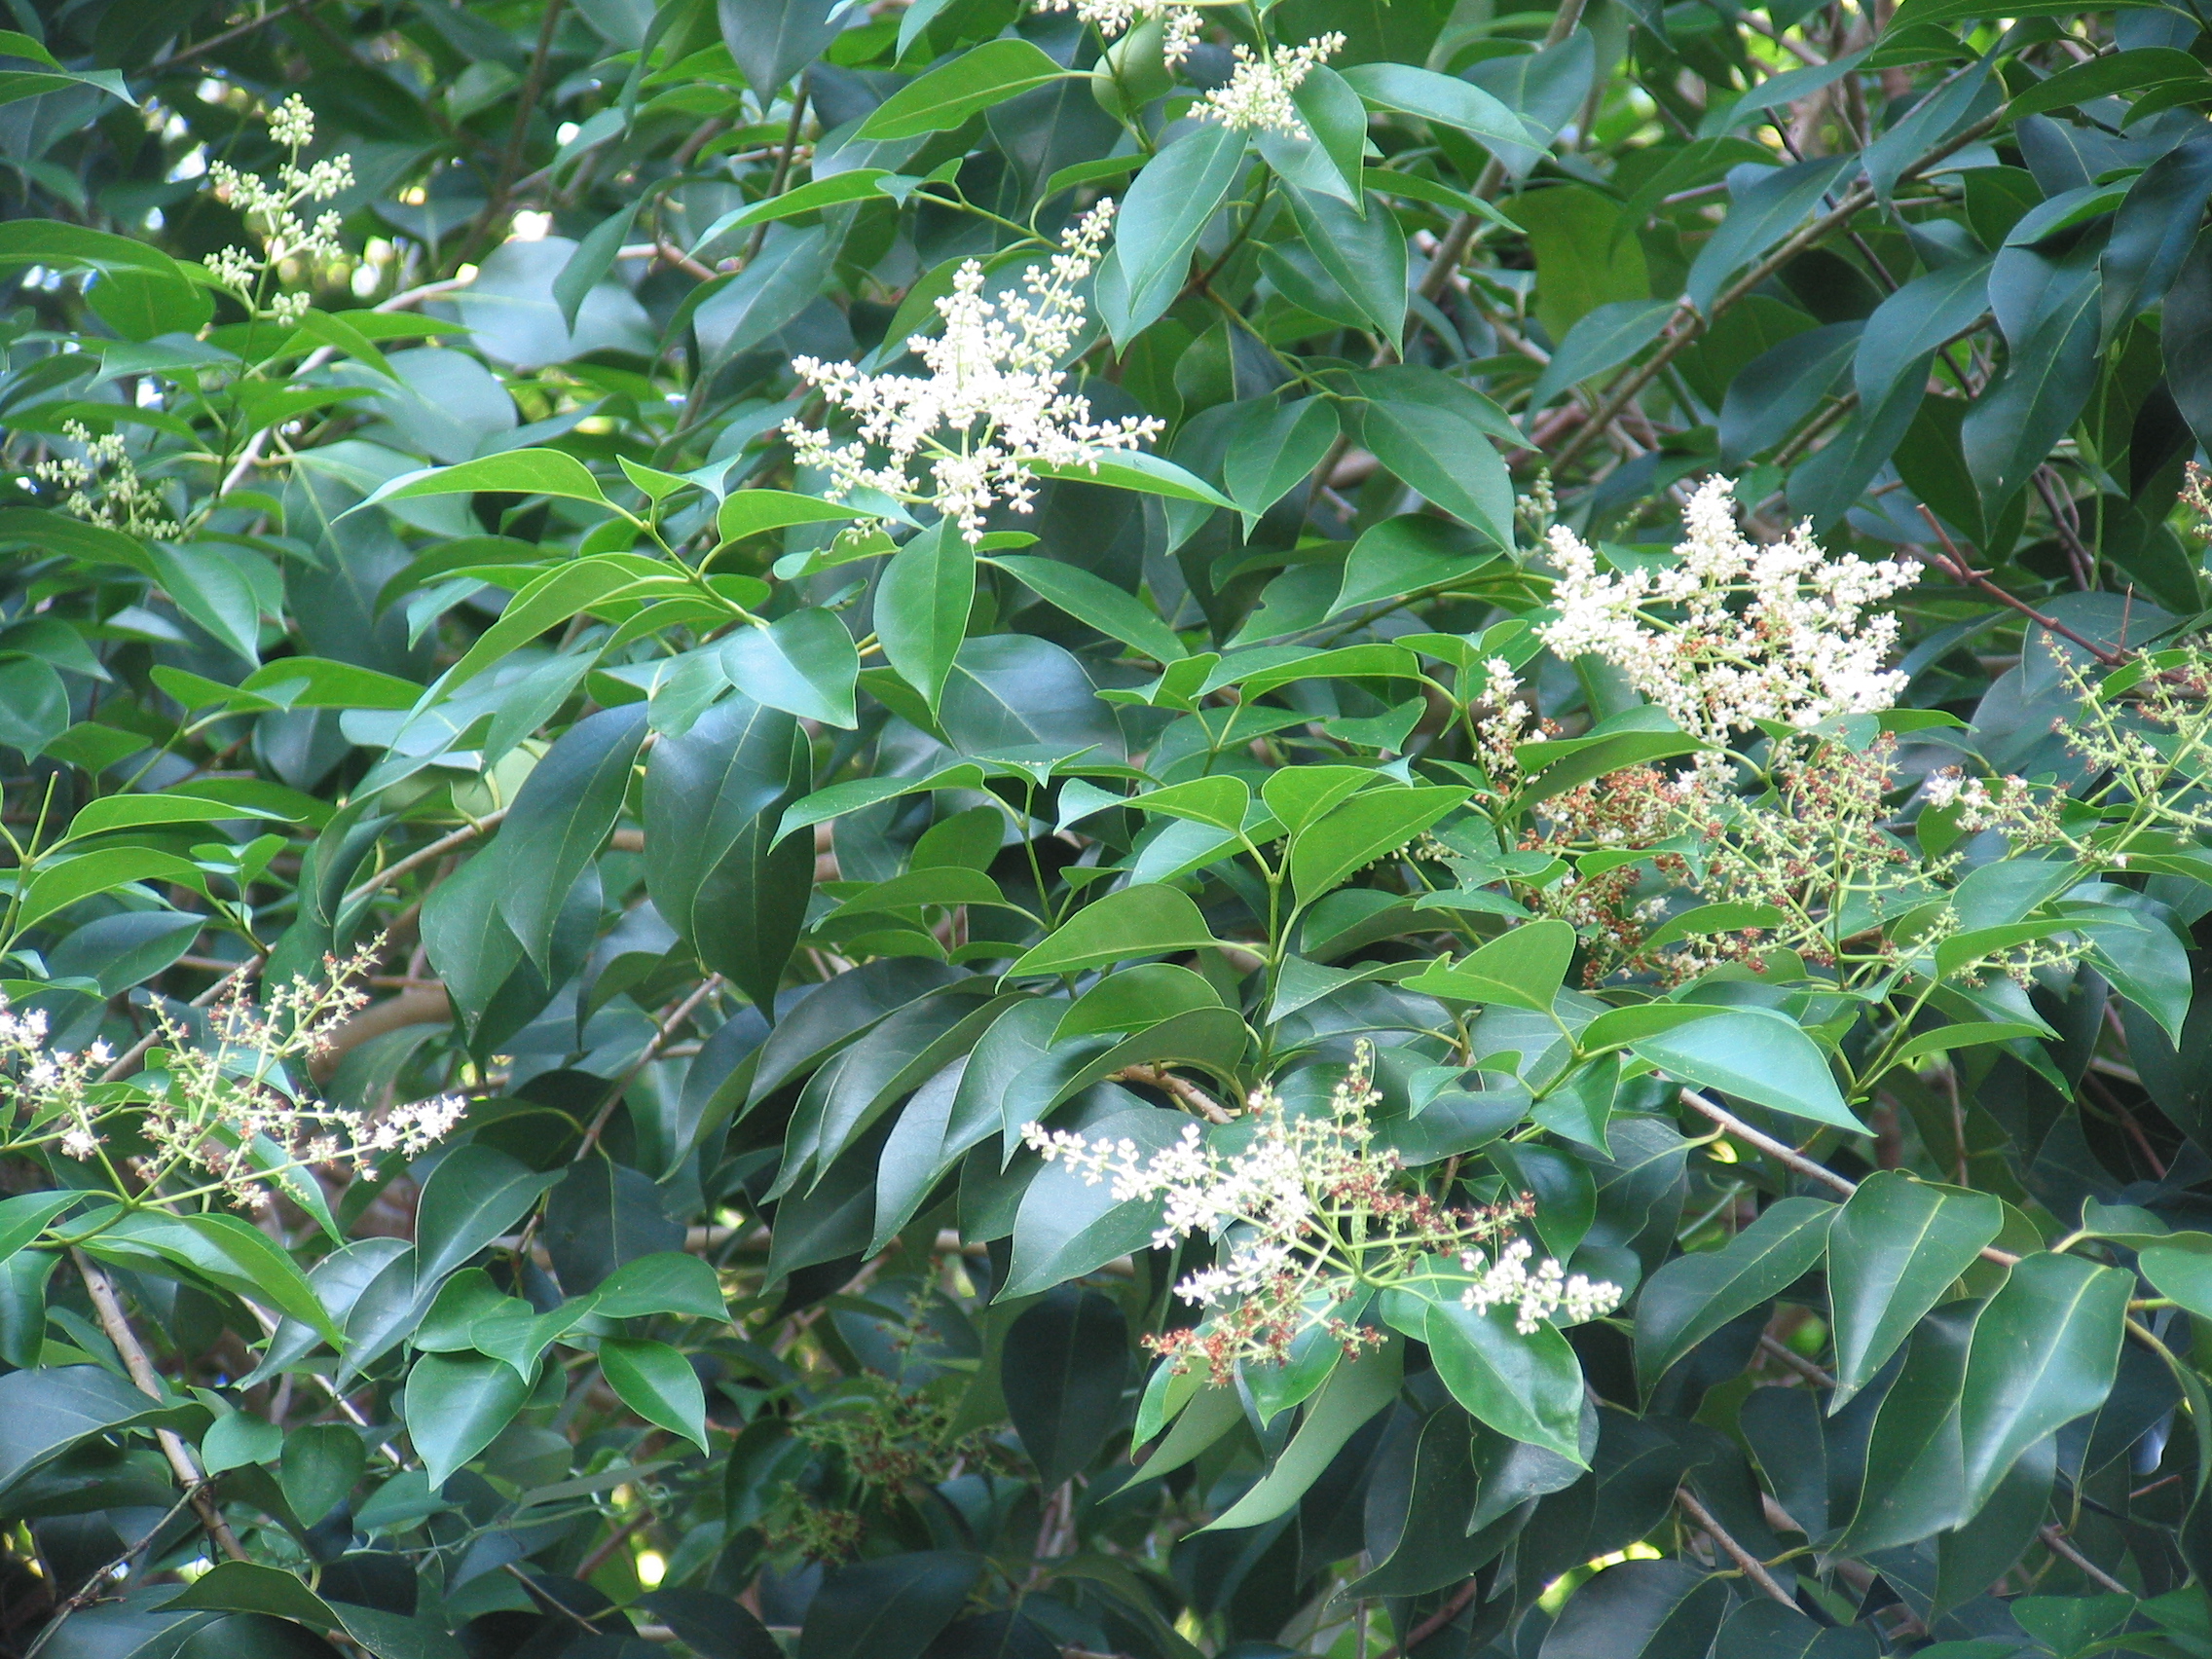 White clusters of pyramidal flowers